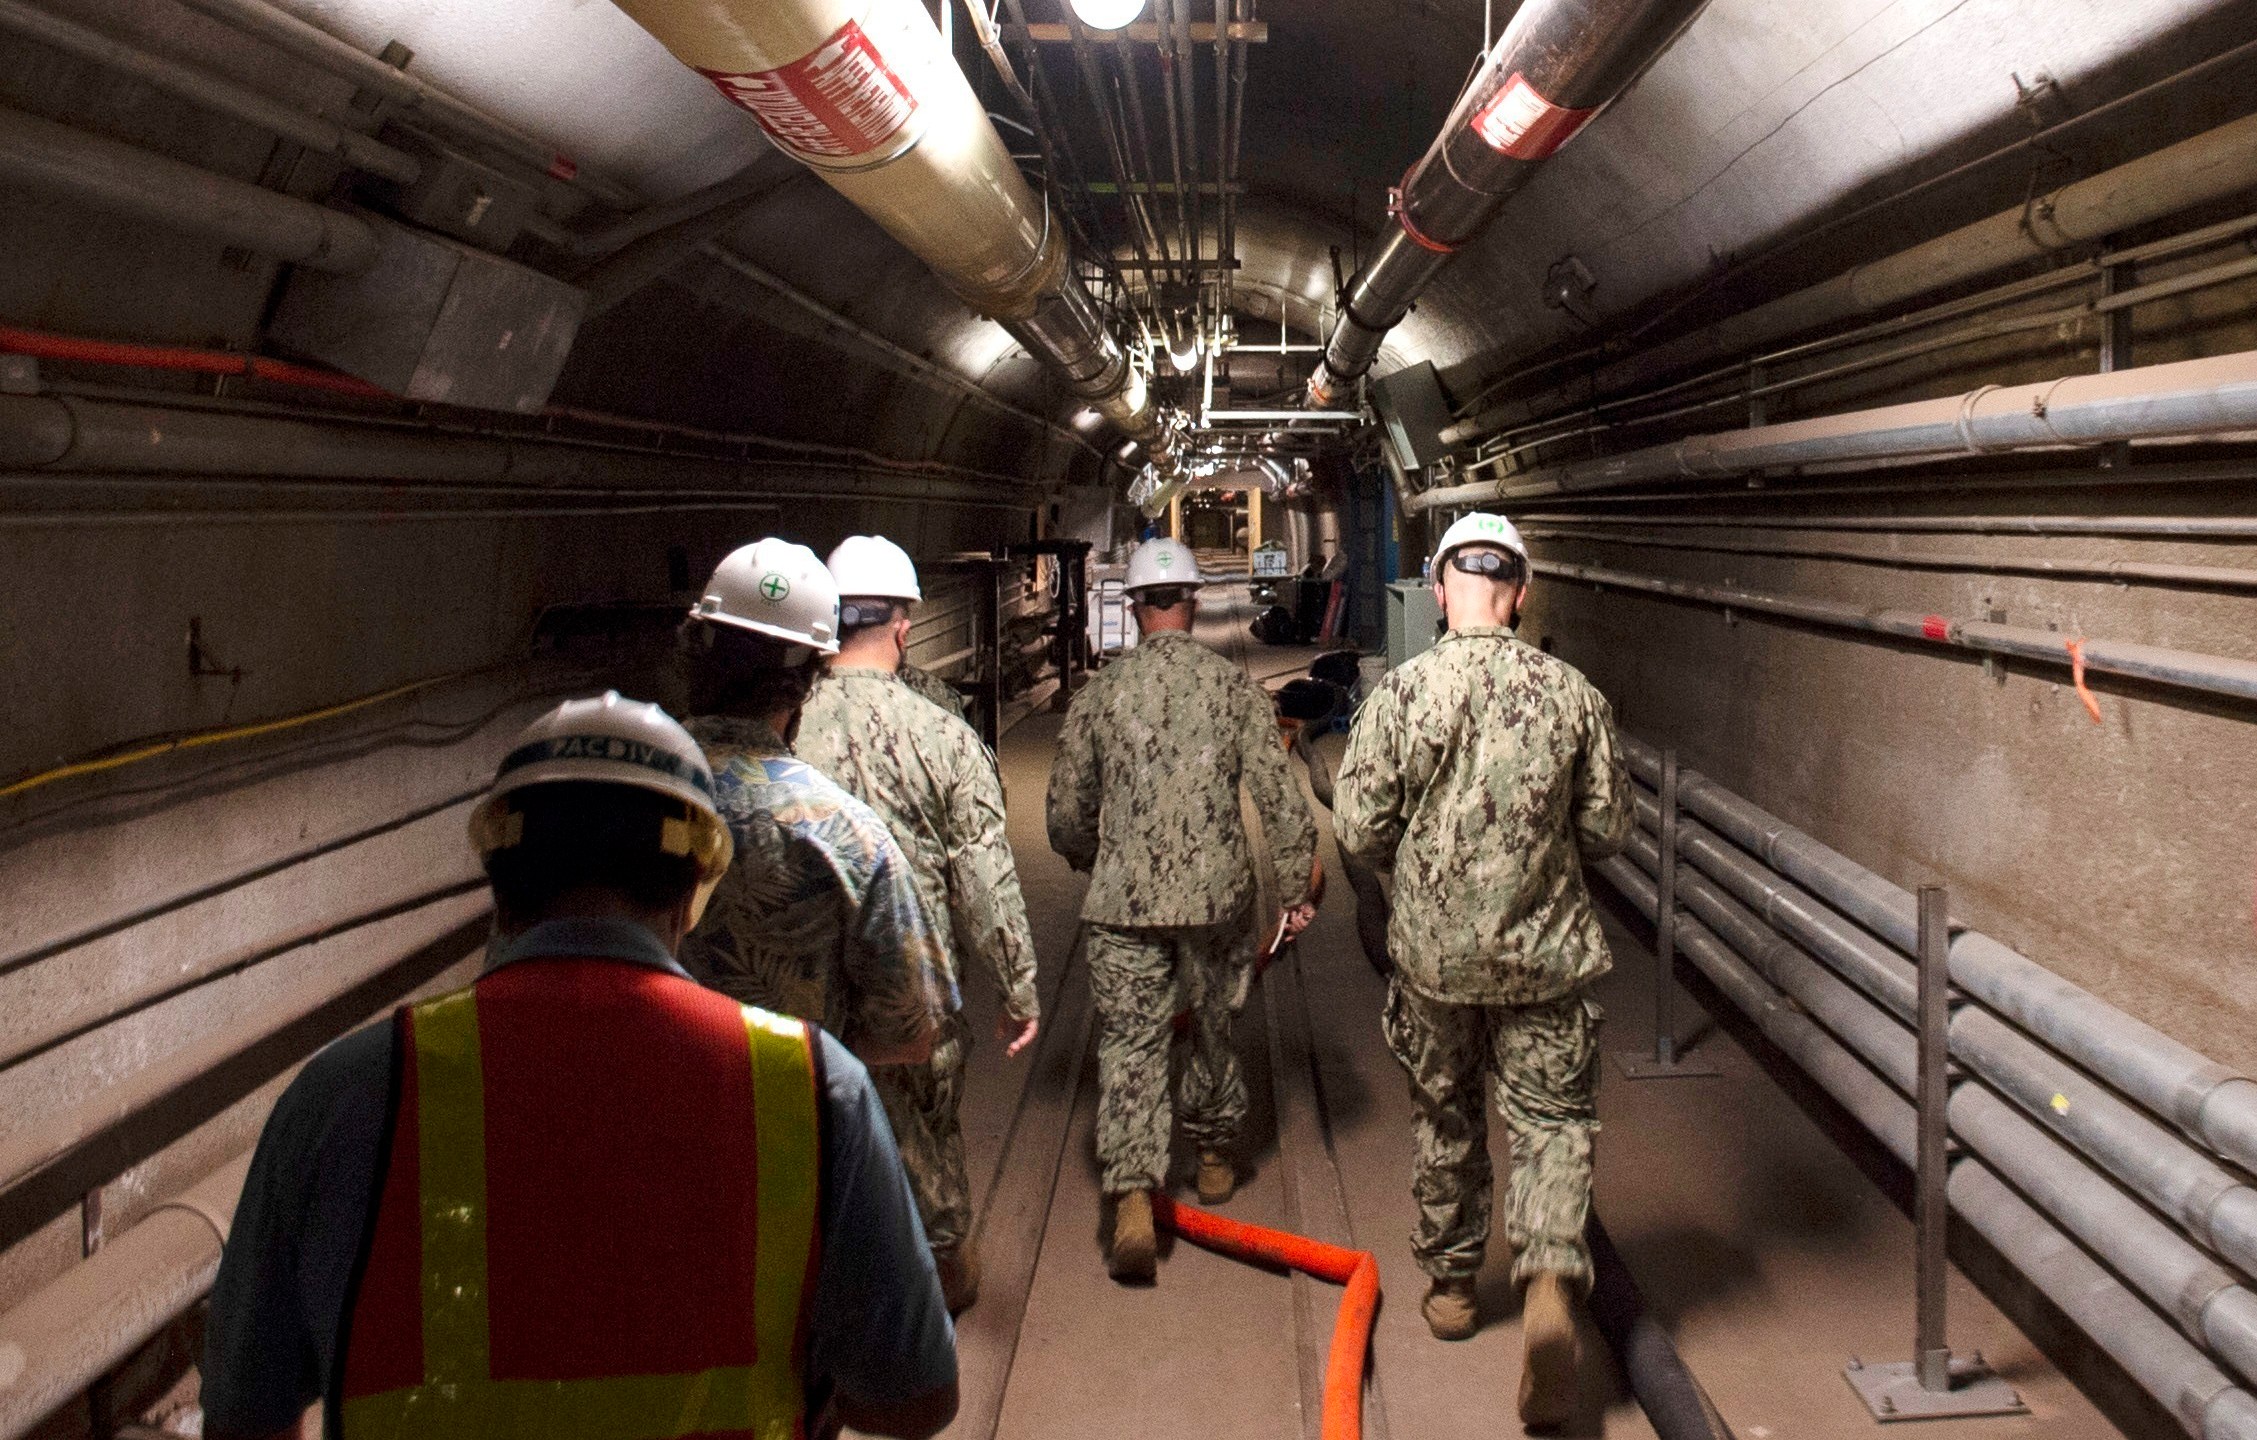 FILE - In this photo provided by the U.S. Navy, Rear Adm. John Korka, Commander, Naval Facilities Engineering Systems Command (NAVFAC), and Chief of Civil Engineers, leads Navy and civilian water quality recovery experts through the tunnels of the Red Hill Bulk Fuel Storage Facility, near Pearl Harbor, Hawaii, Dec. 23, 2021. On Thursday, Sept. 28, 2023, the Navy issued written reprimands to three now-retired military officers for their roles in the spill of jet fuel into Pearl Harbor's drinking water in 2021, but did not fire, suspend, dock the pay or reduce the rank of anyone for the incident. (Petty Officer 1st Class Luke McCall/U.S. Navy via AP, File)